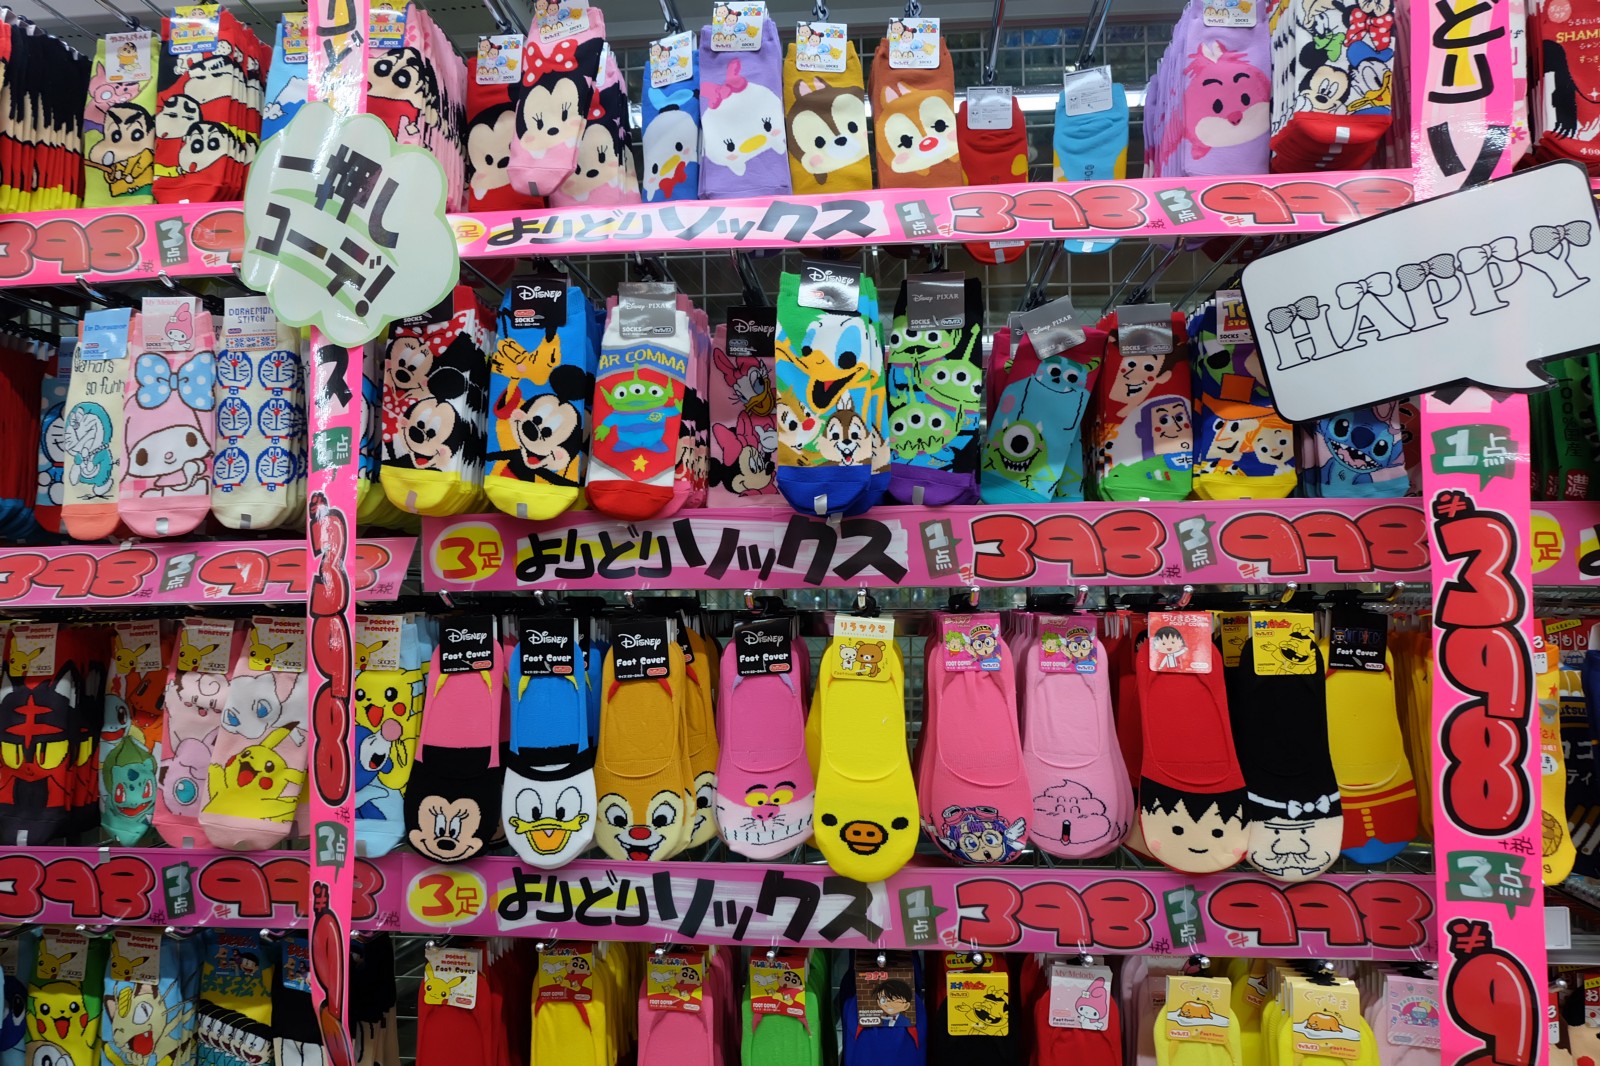 Cute and inexpensive character socks